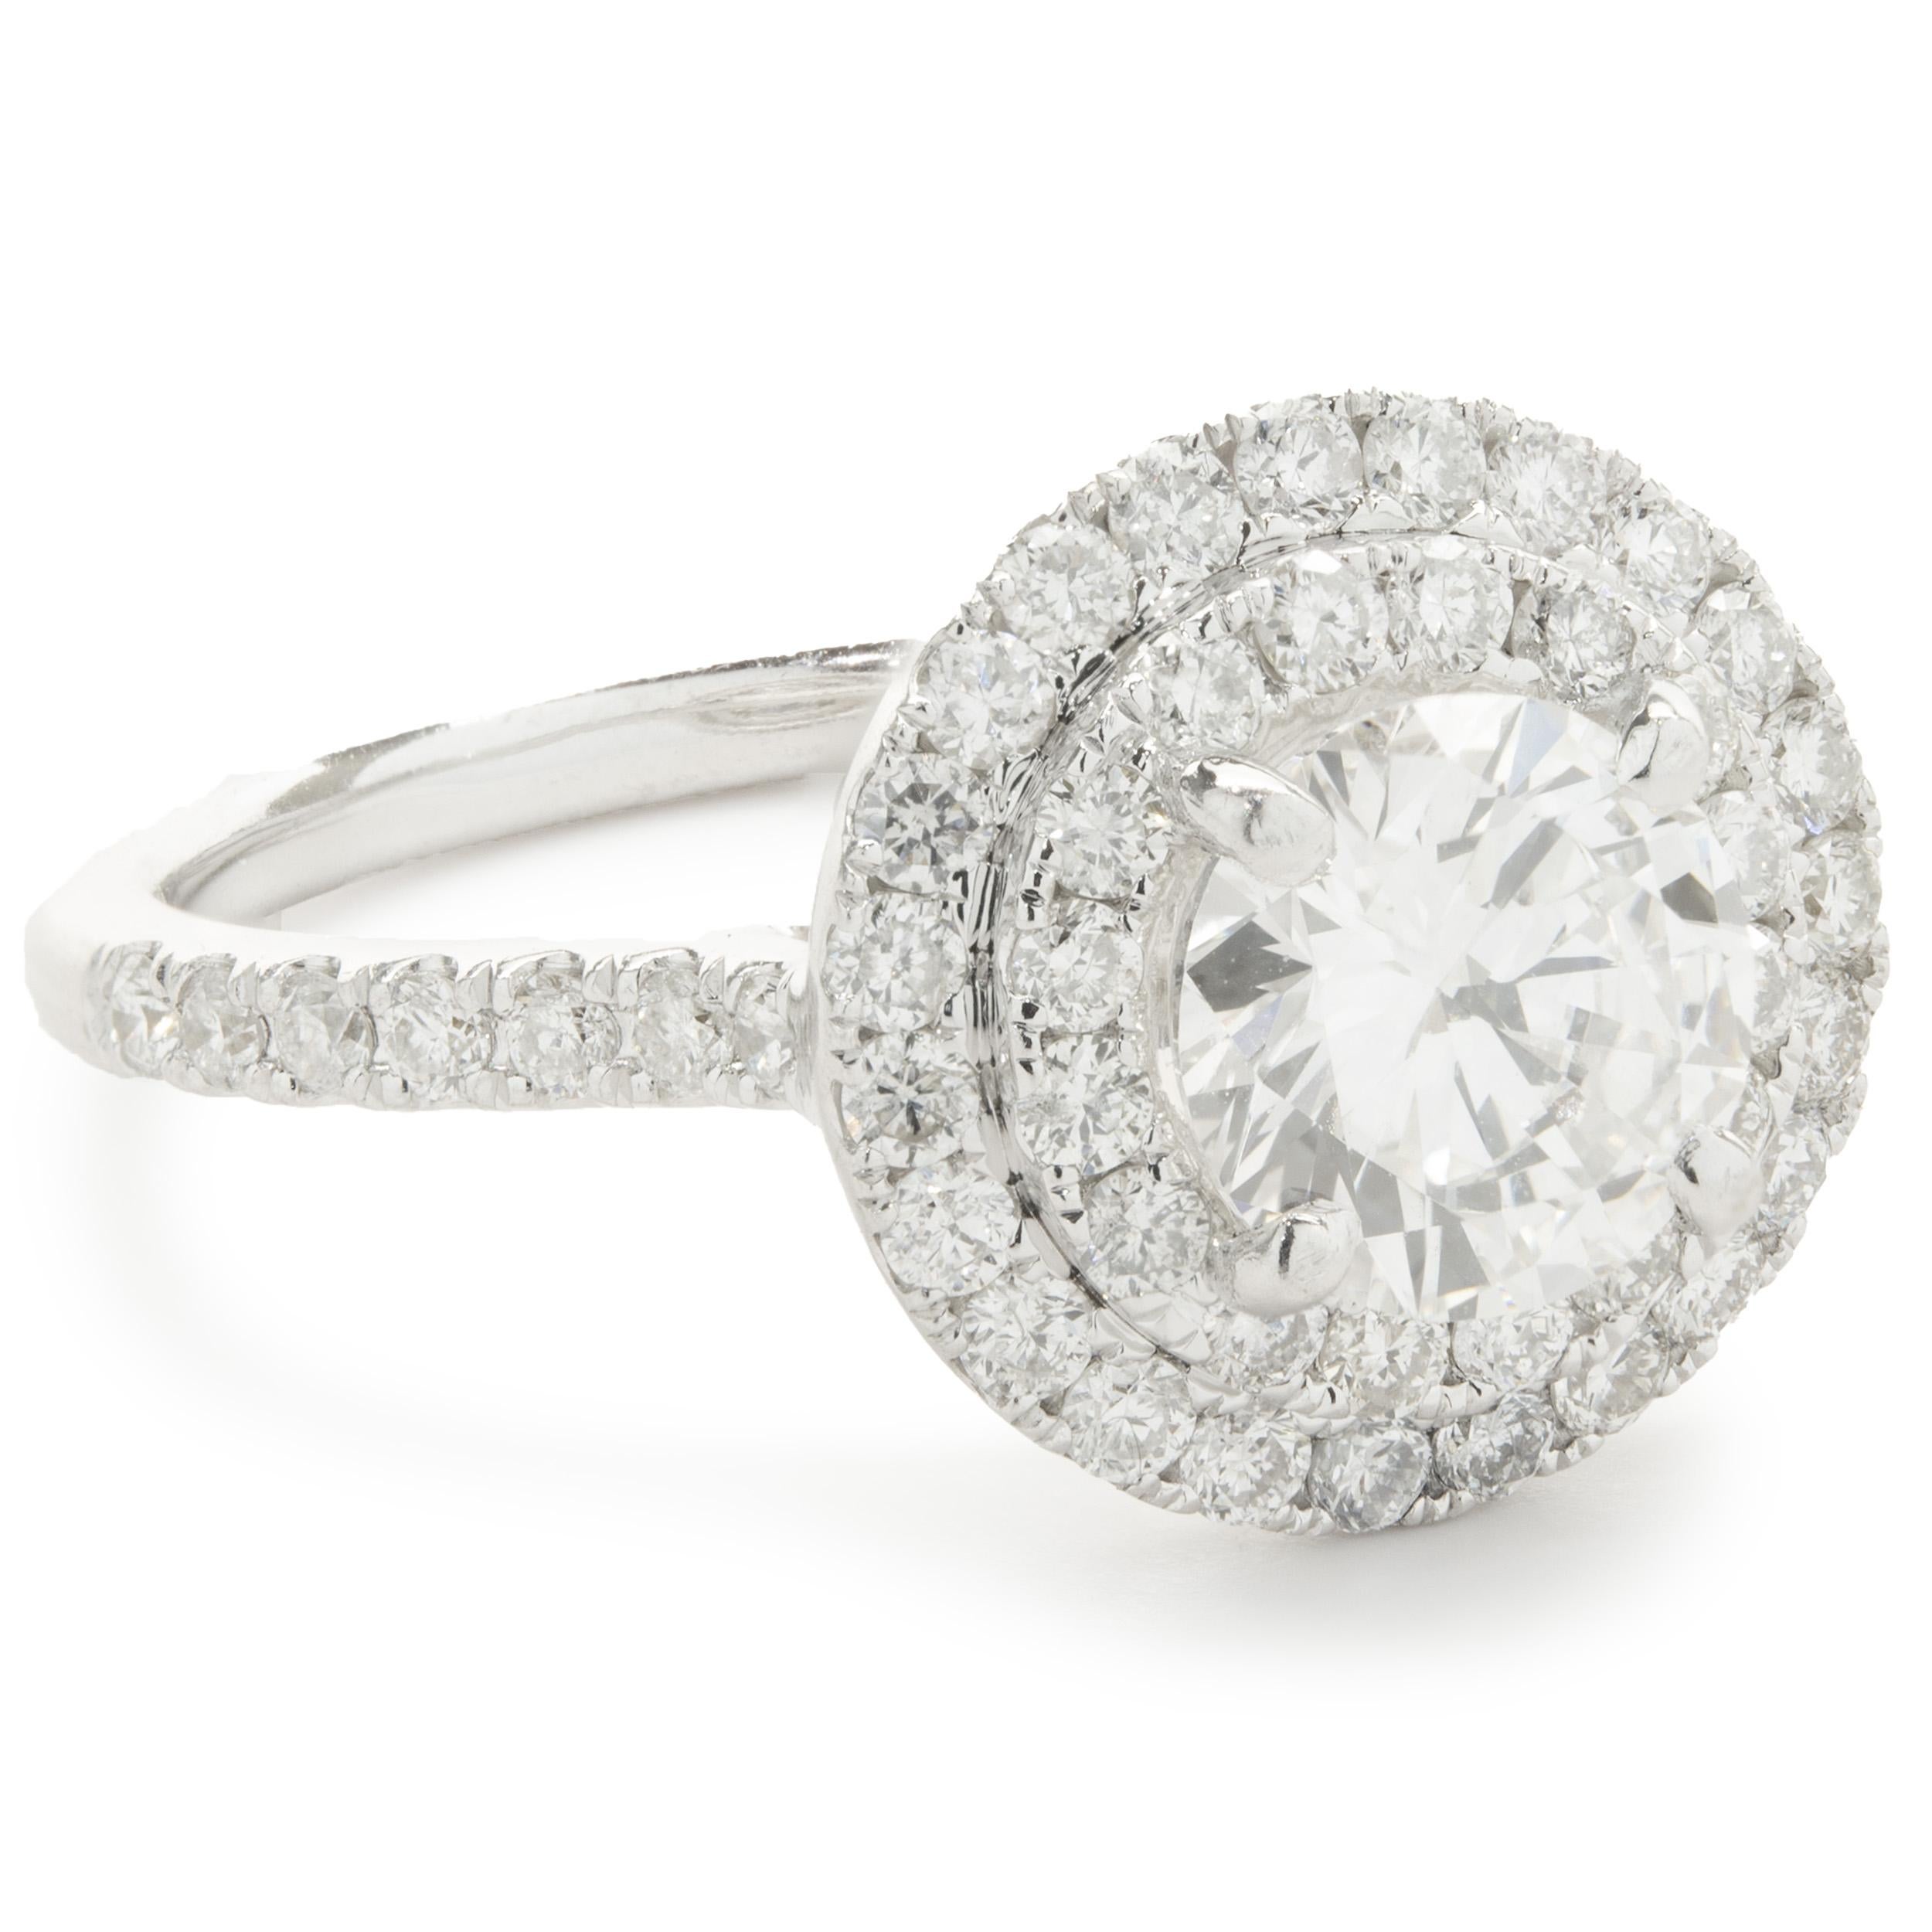 Material: 14K white gold
Center Diamond: 1 round brilliant cut = .90ct
Color: H
Clarity: VS2
Diamonds: round cut = .85cttw
Color: G
Clarity: VS
Ring Size: 6.25 (please allow up to 2 additional business days for sizing requests)
Dimensions: ring